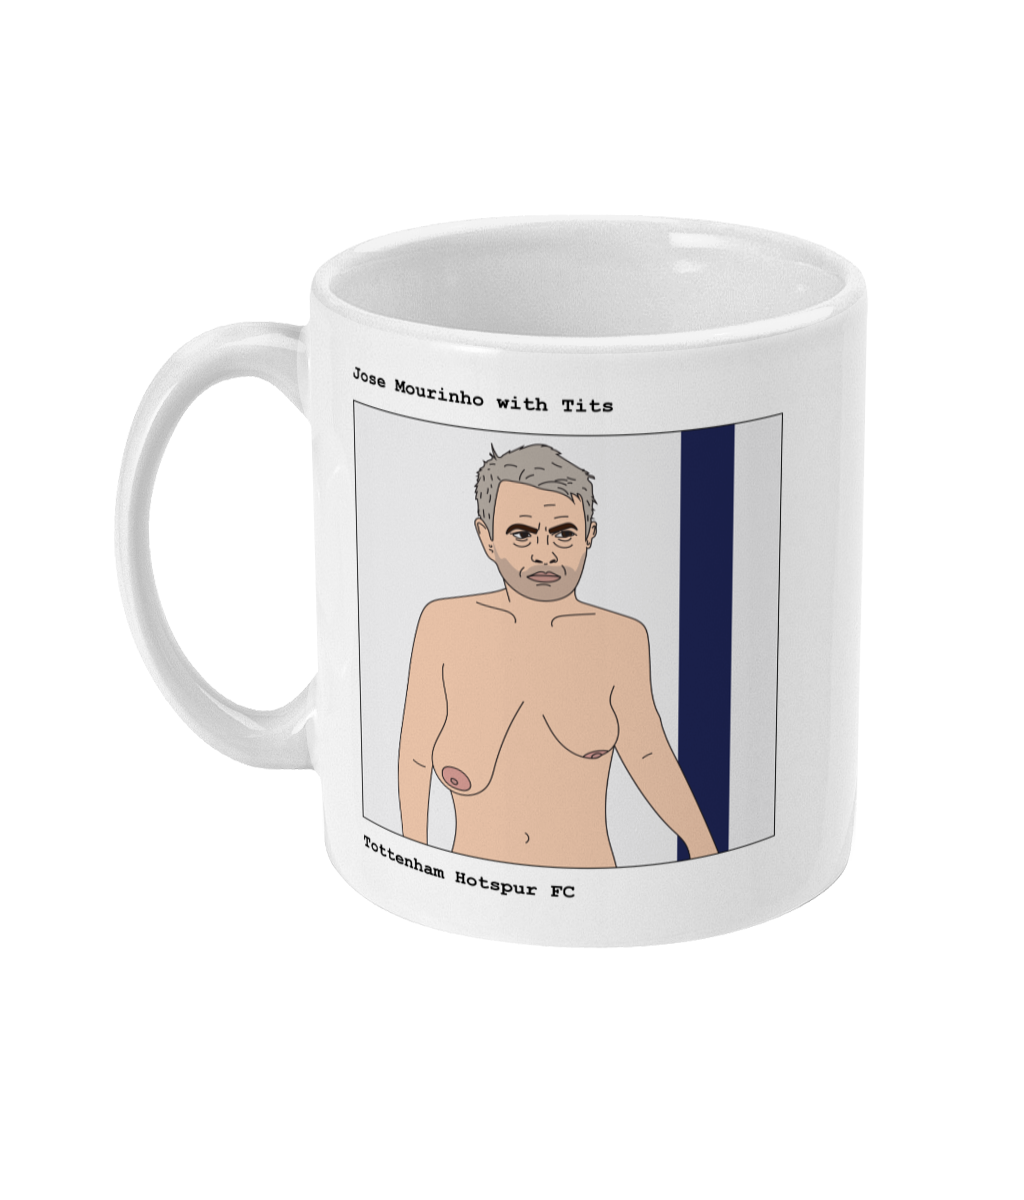 José Mourinho with Tits - Footballers with Tits